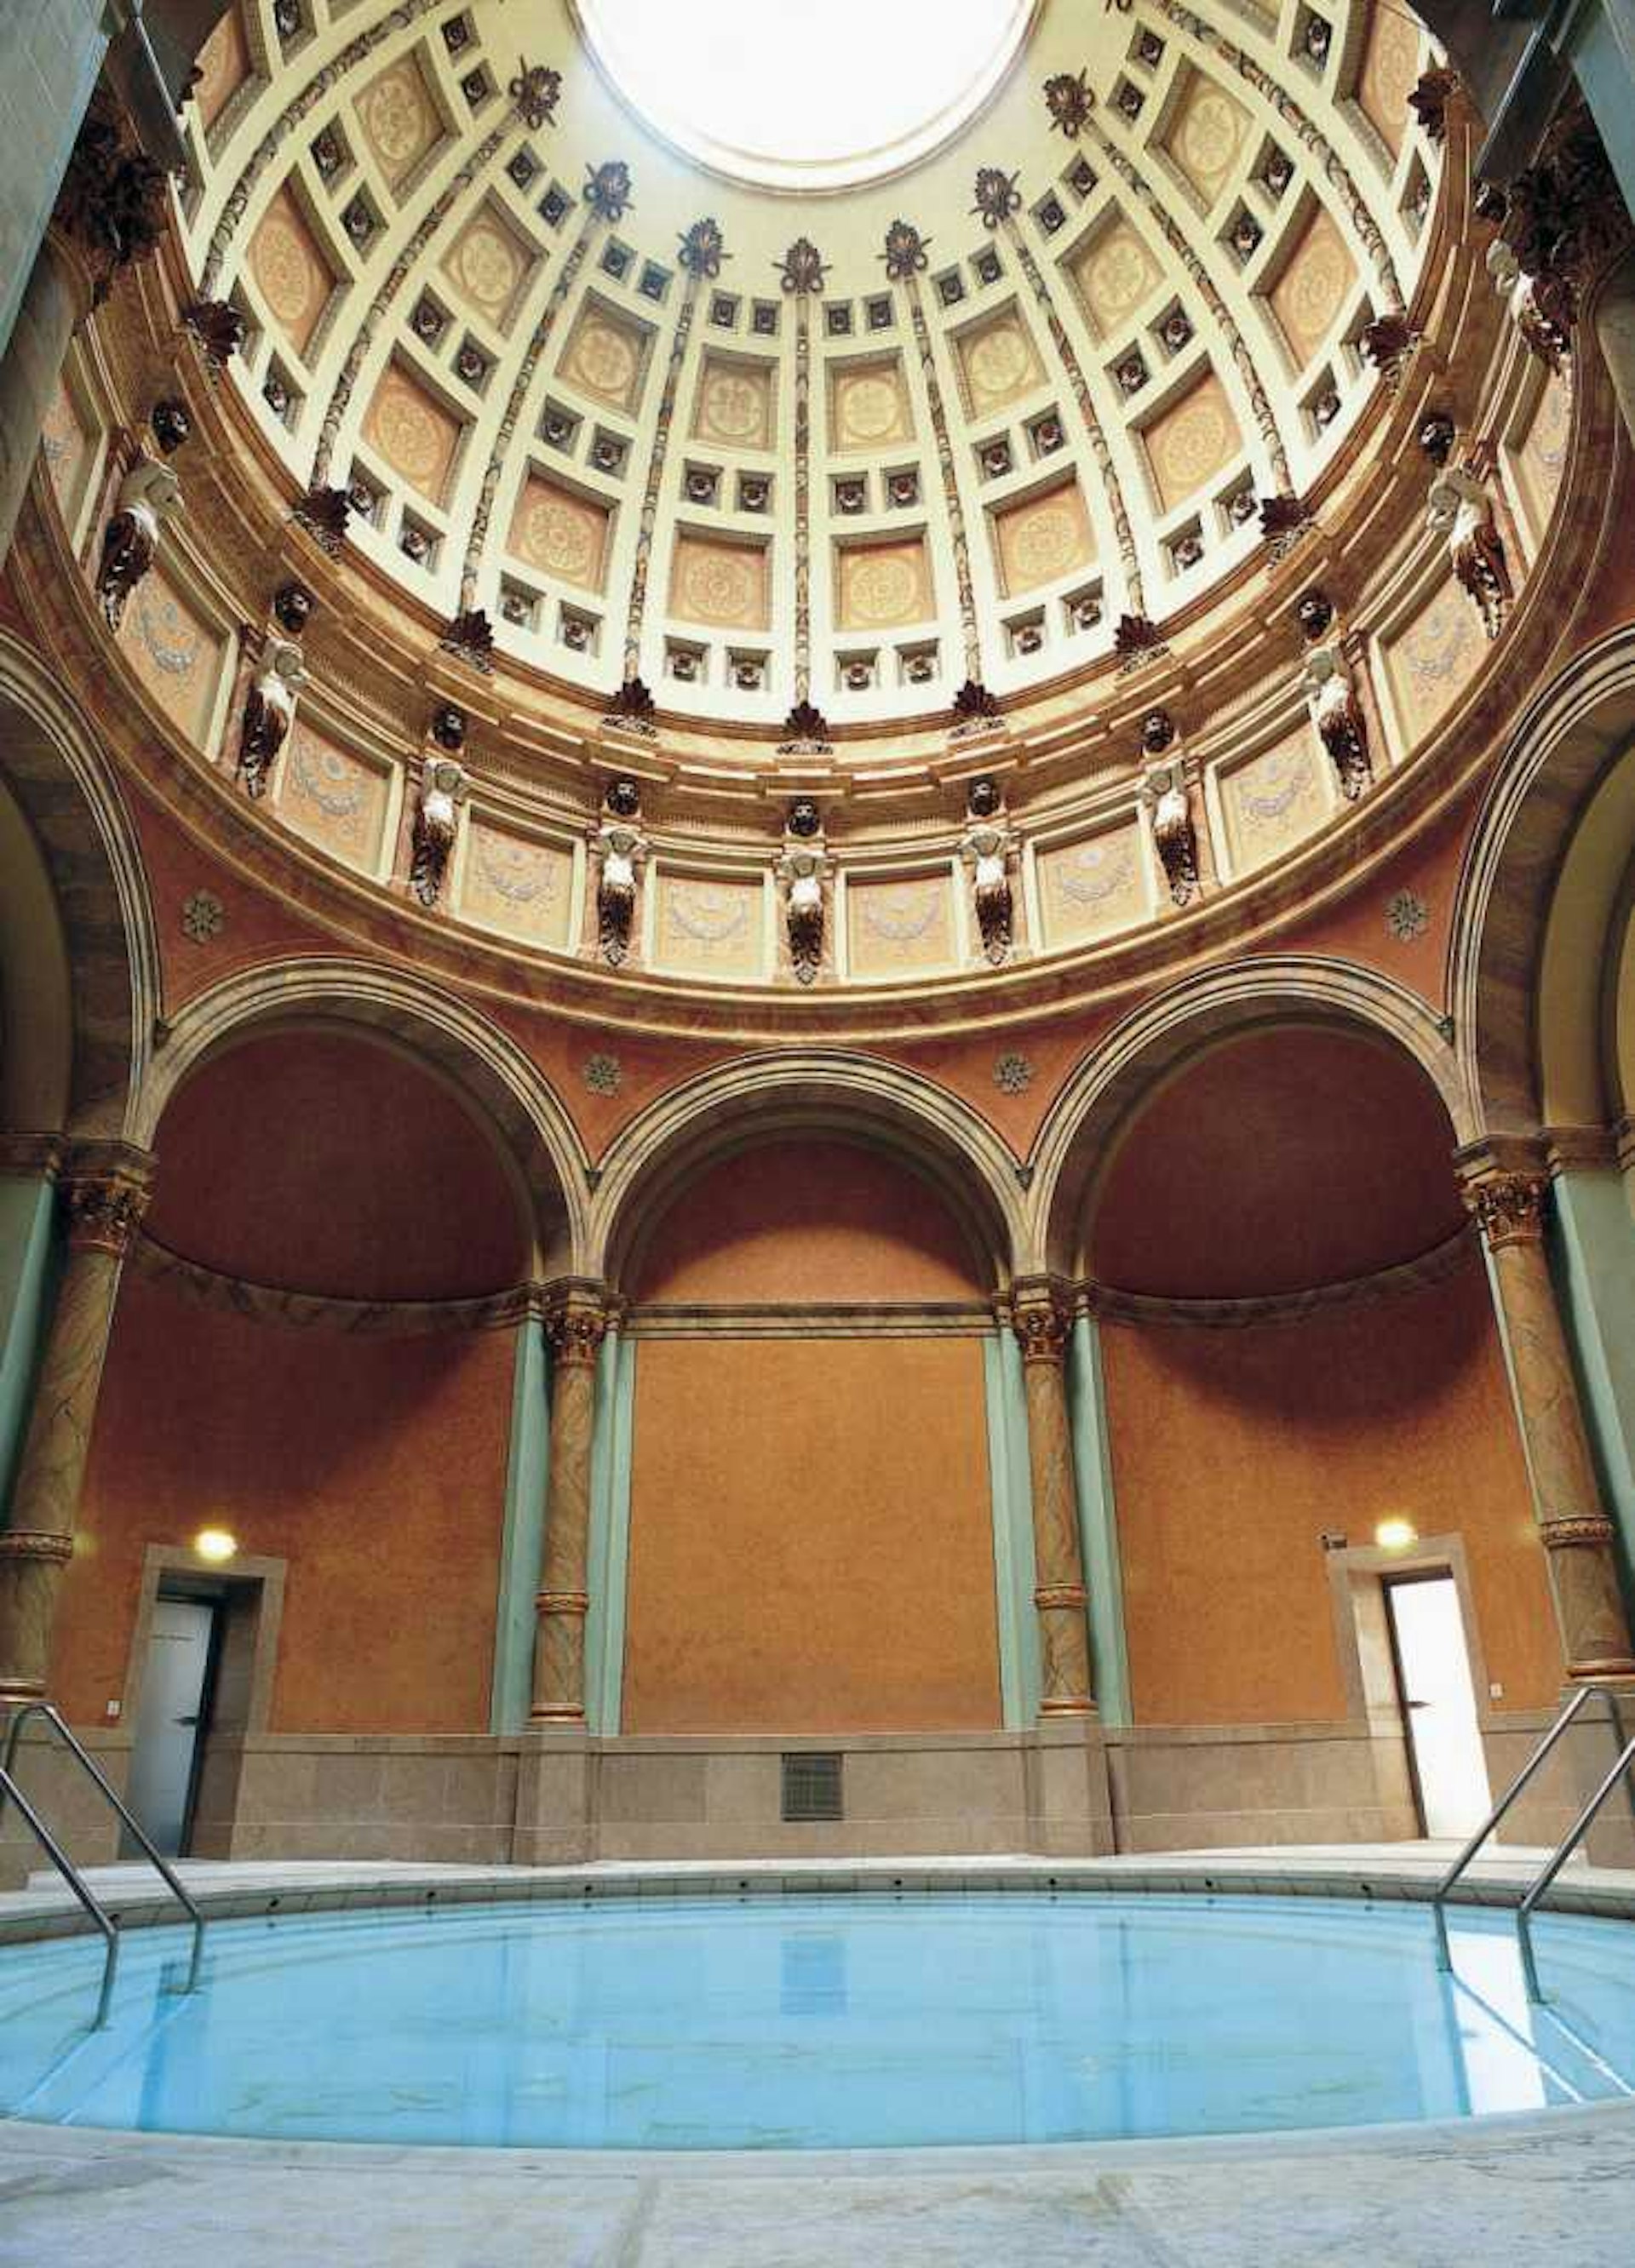 A circular pool sits below a high-domed ceiling with intricate details in the Friedrichsbad 